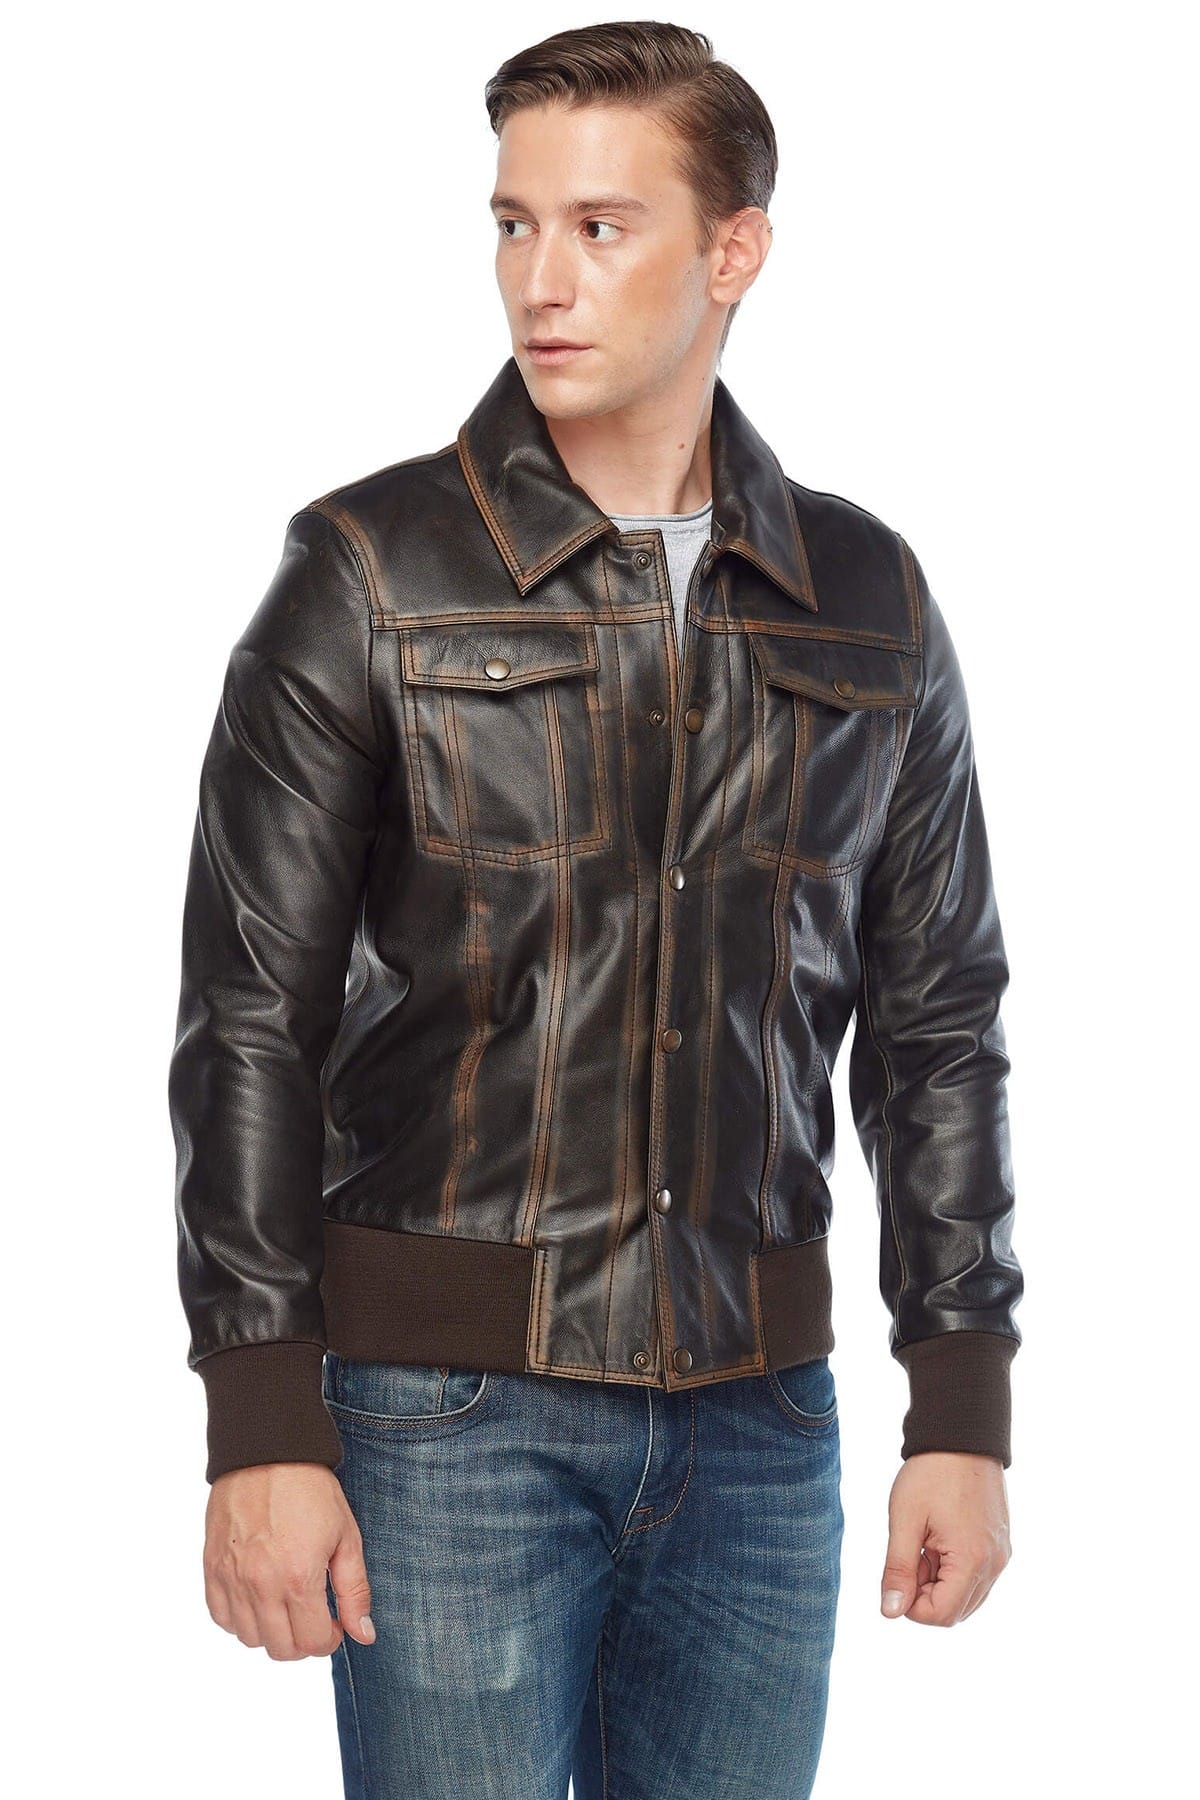 Will Chalker Men's 100 % Real Brown Leather Bomber Real Distressed Jacket